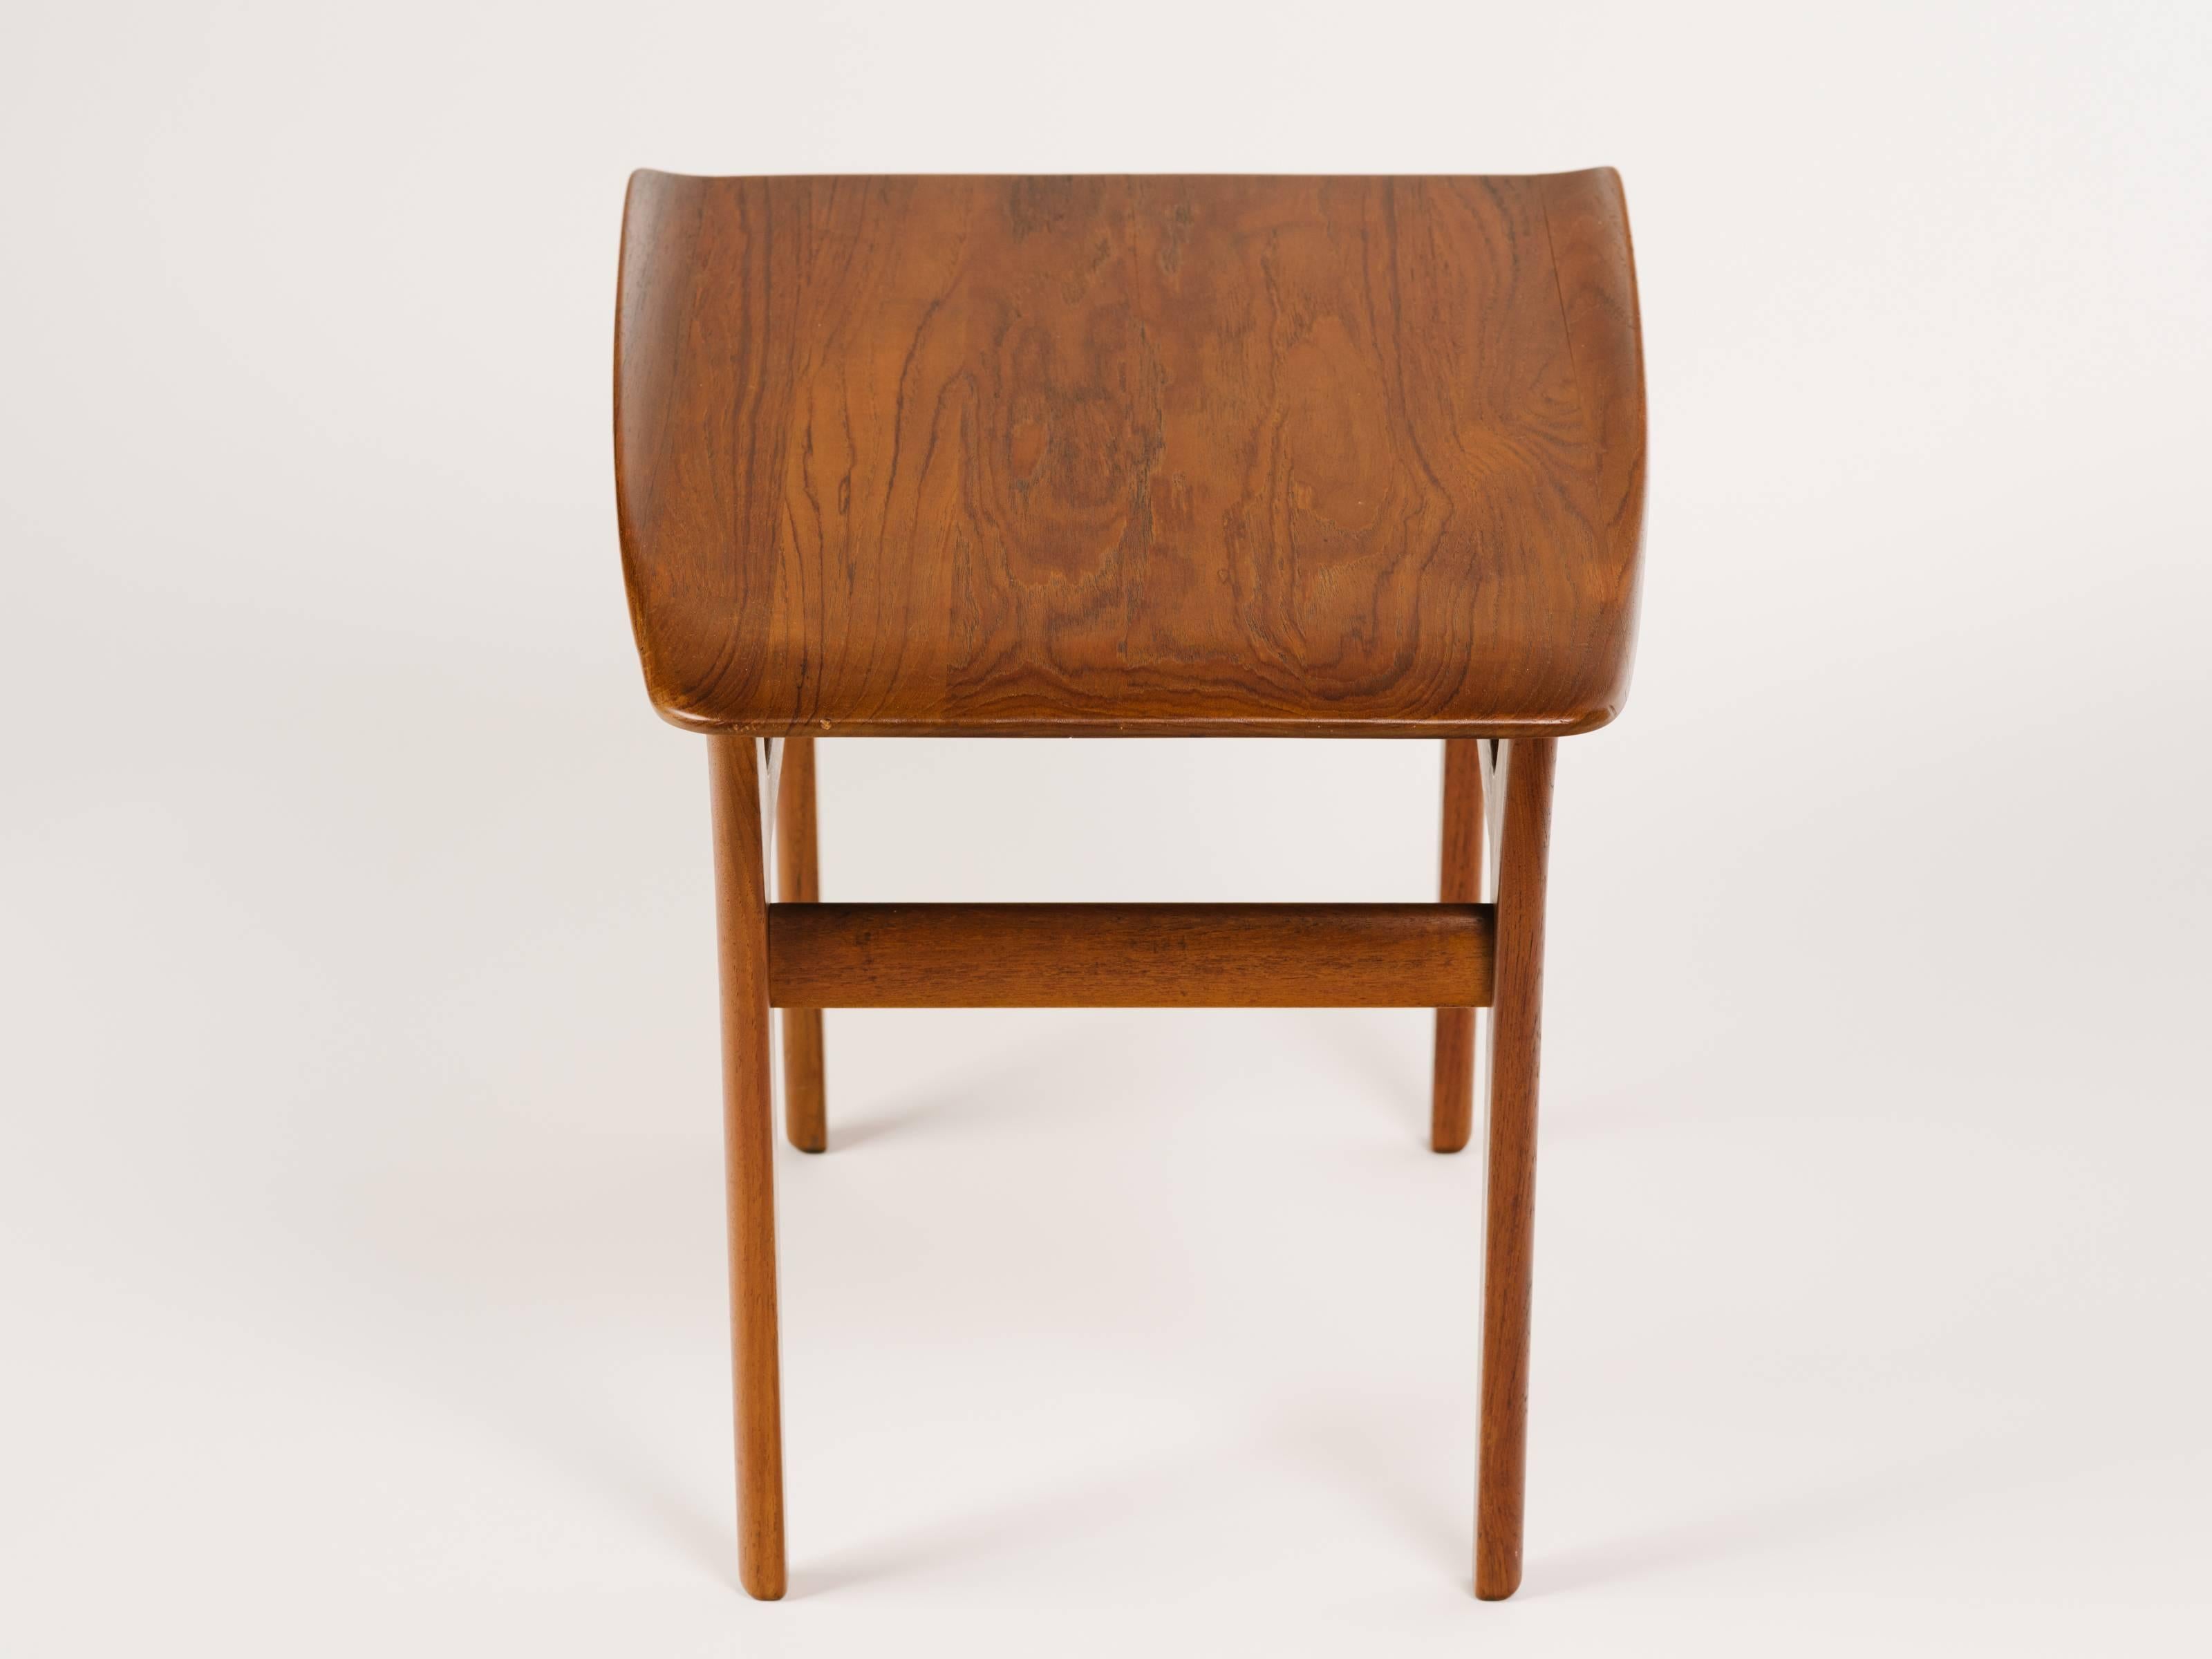 Mid-20th Century Pair of Danish Modern Teak Wood Side Tables in the Style of Poul Jensen